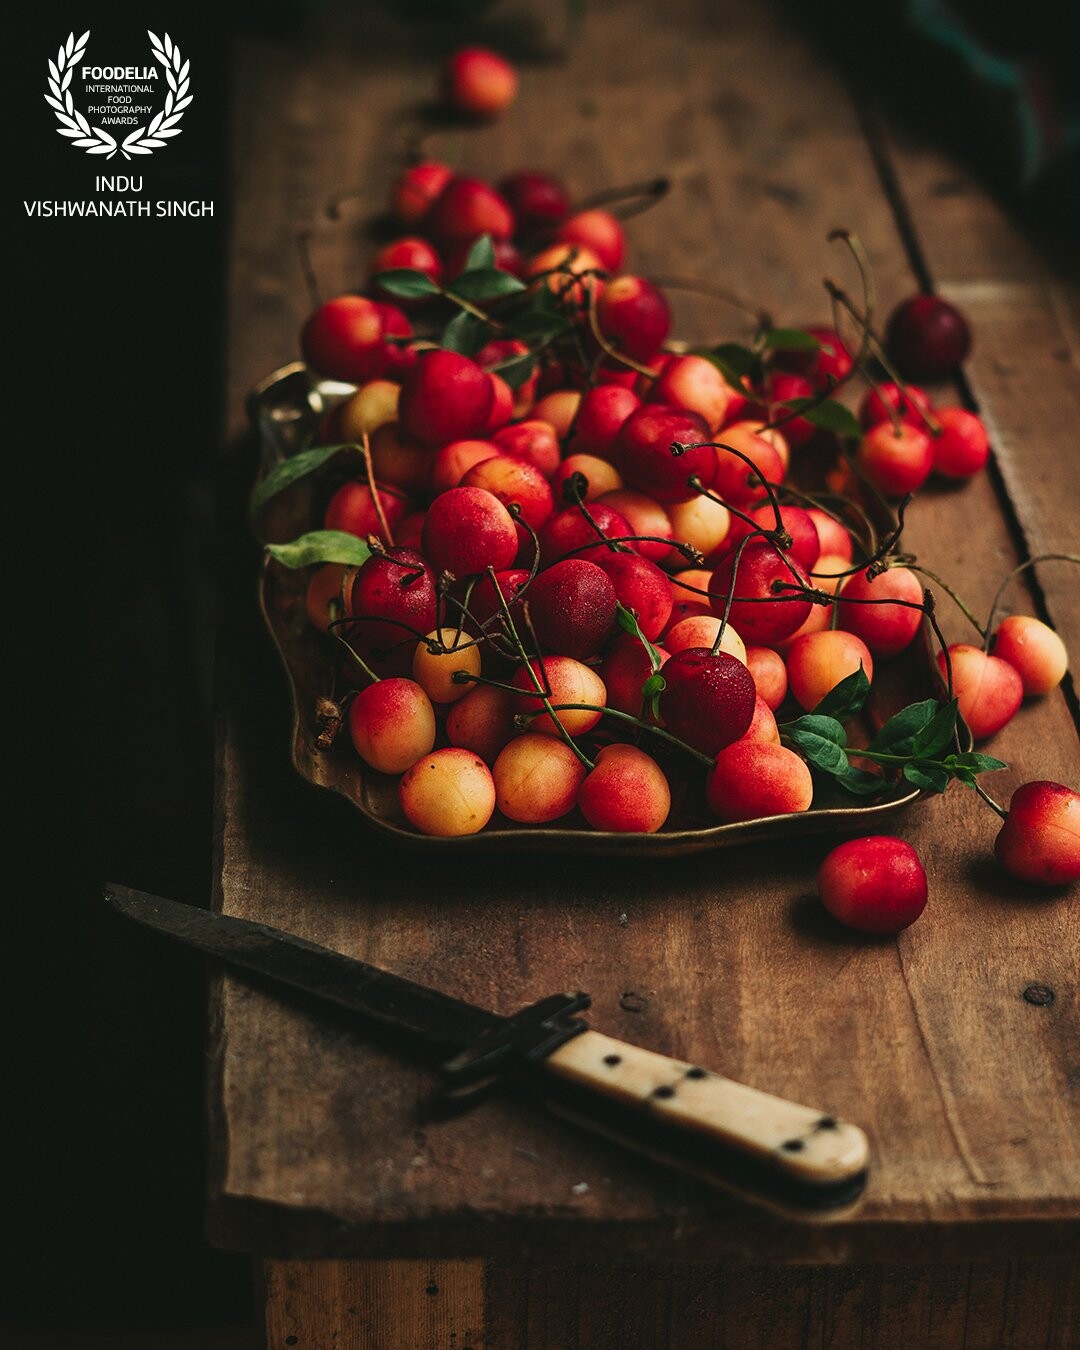 Shot in natural light, I wanted the feel of freshness and dew on the cherries. The interest here was the gradation of colors on the cherries itself, like a vintage cottage dream.